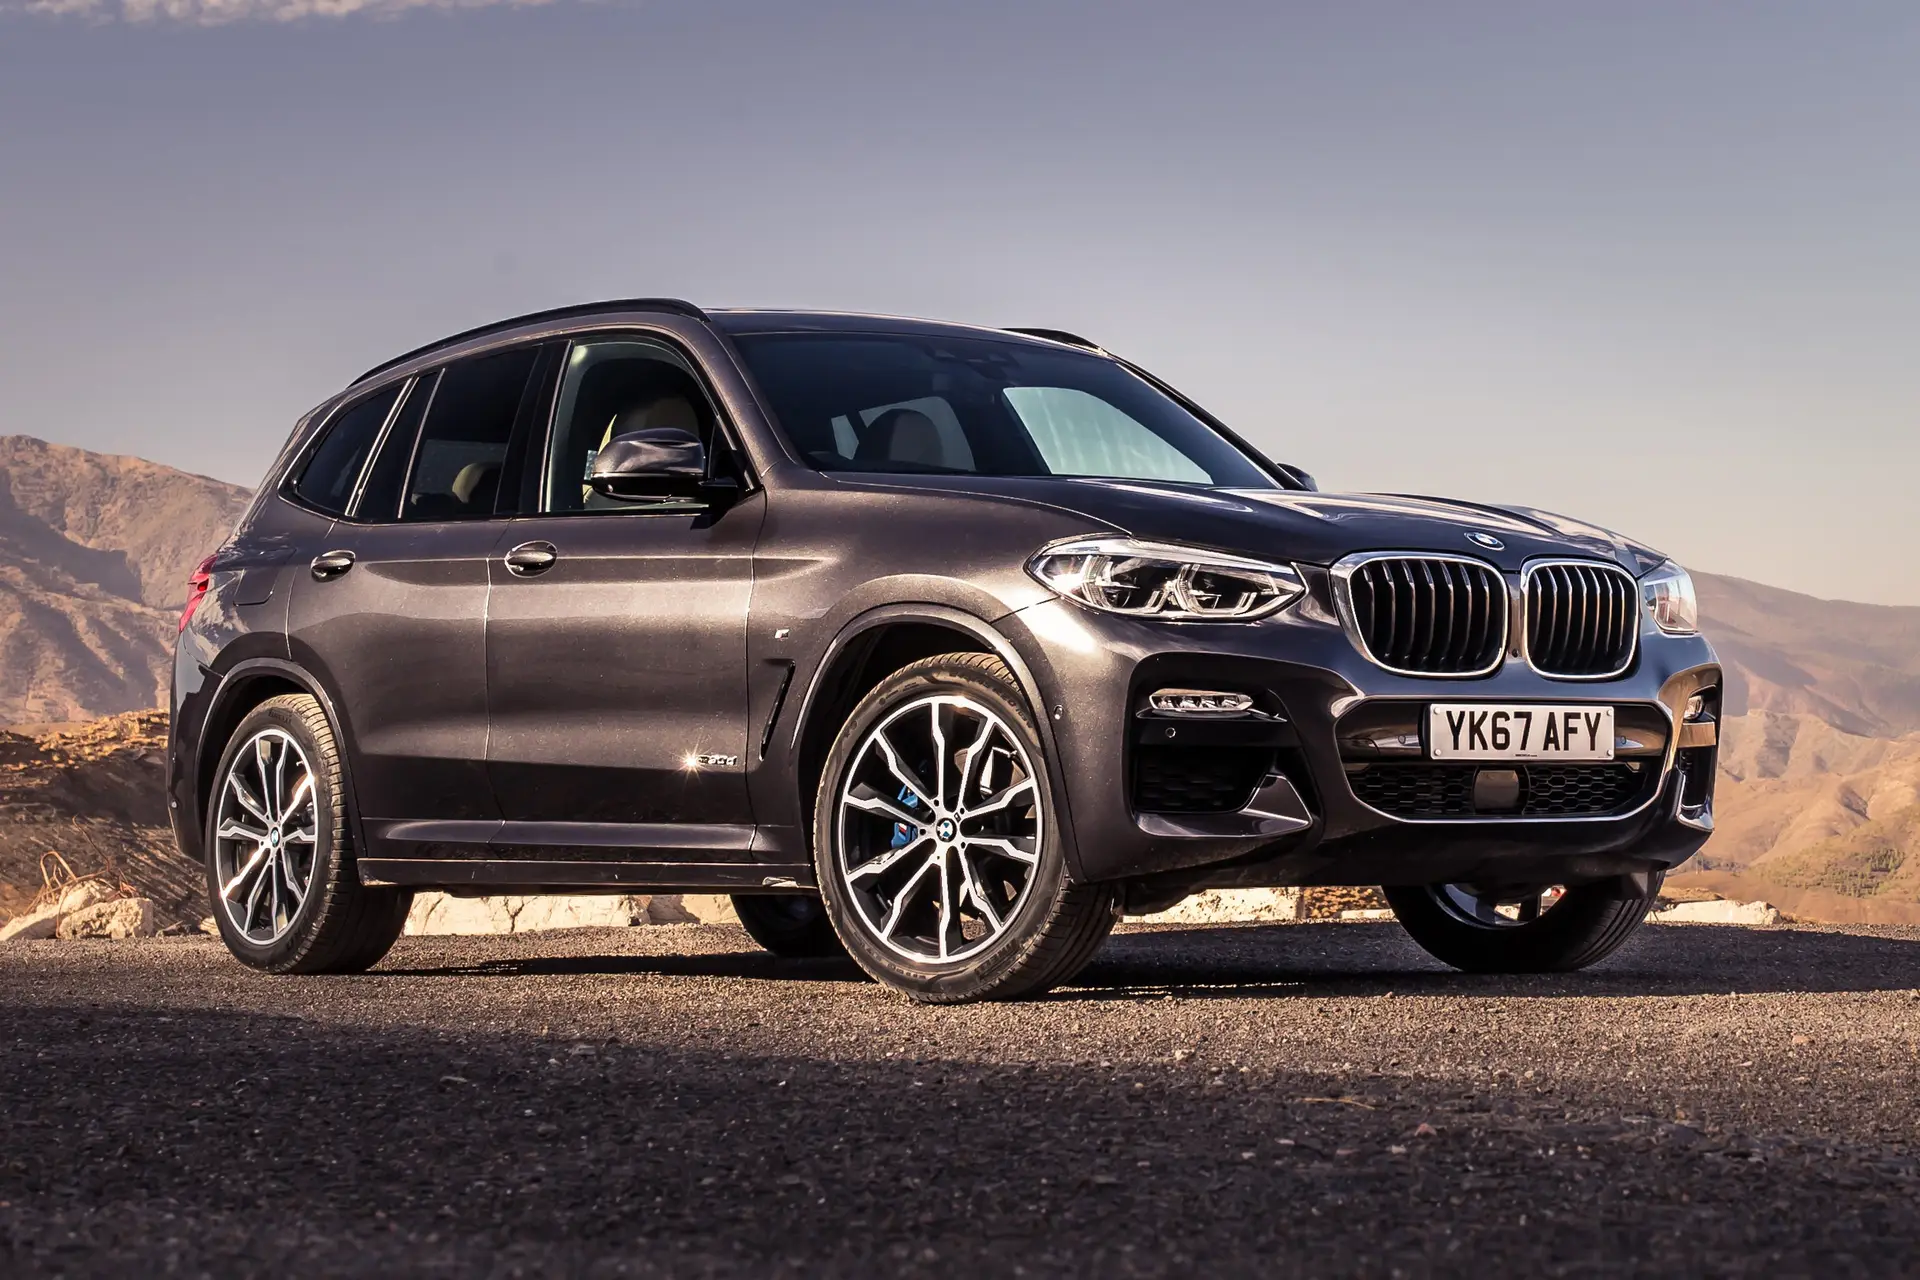 BMW X3 dimensions, boot space and electrification